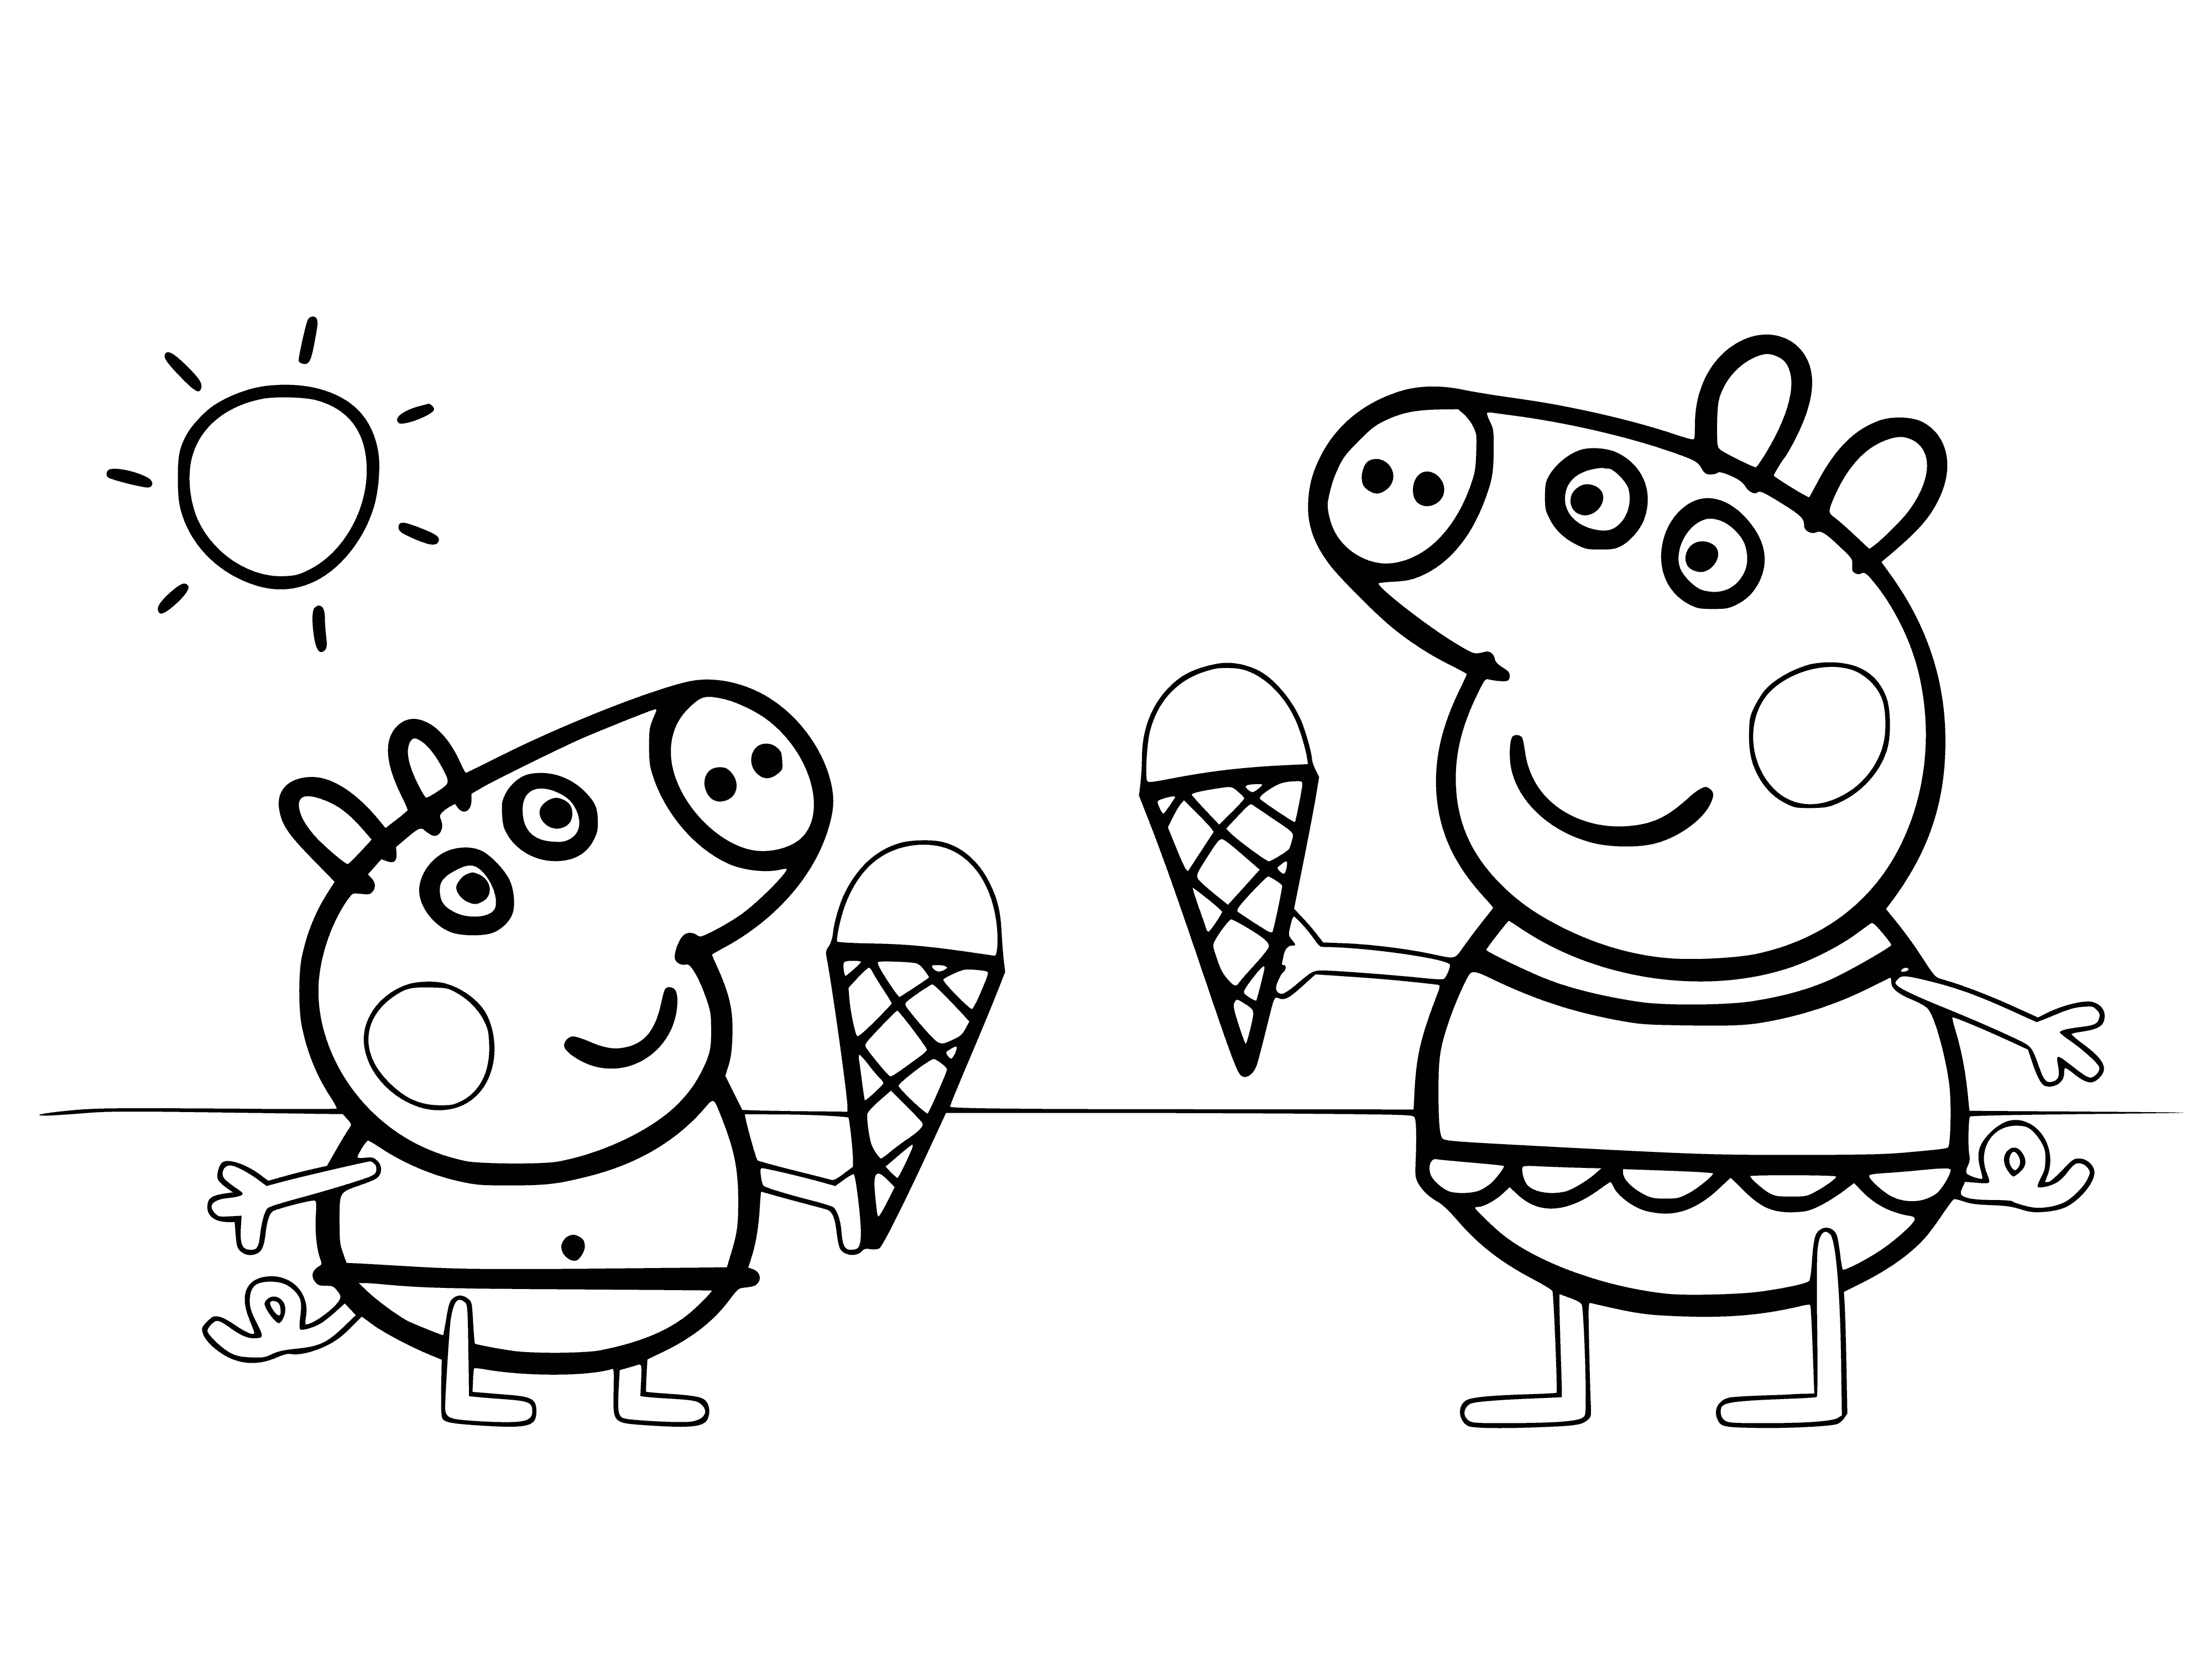 coloring page: Peppa & George eating ice cream & enjoying themselves with cones.